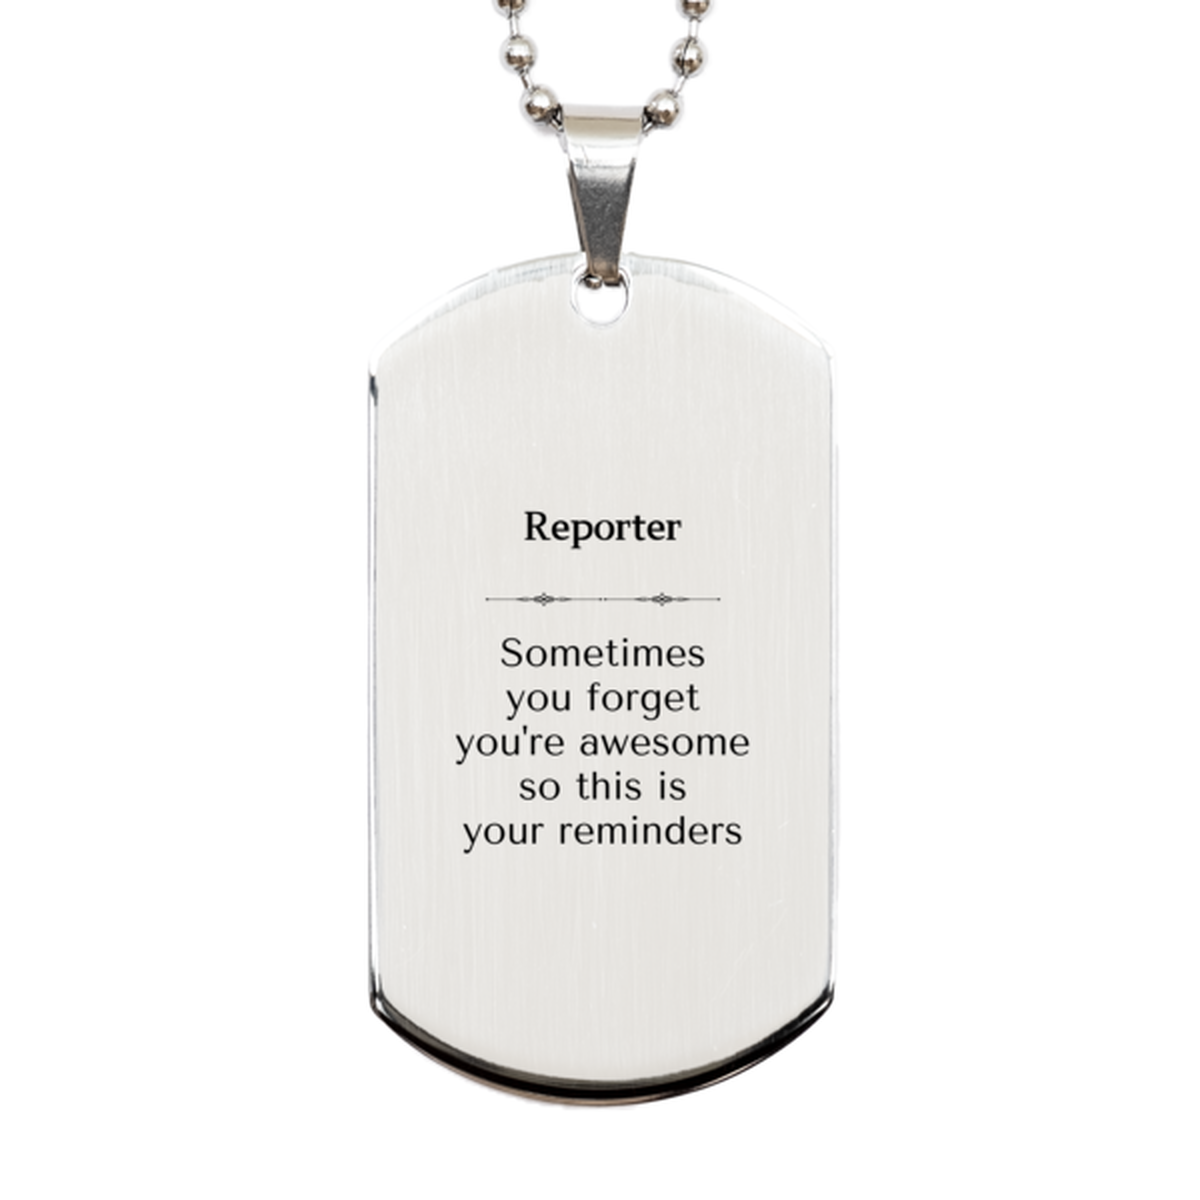 Sentimental Reporter Silver Dog Tag, Reporter Sometimes you forget you're awesome so this is your reminders, Graduation Christmas Birthday Gifts for Reporter, Men, Women, Coworkers